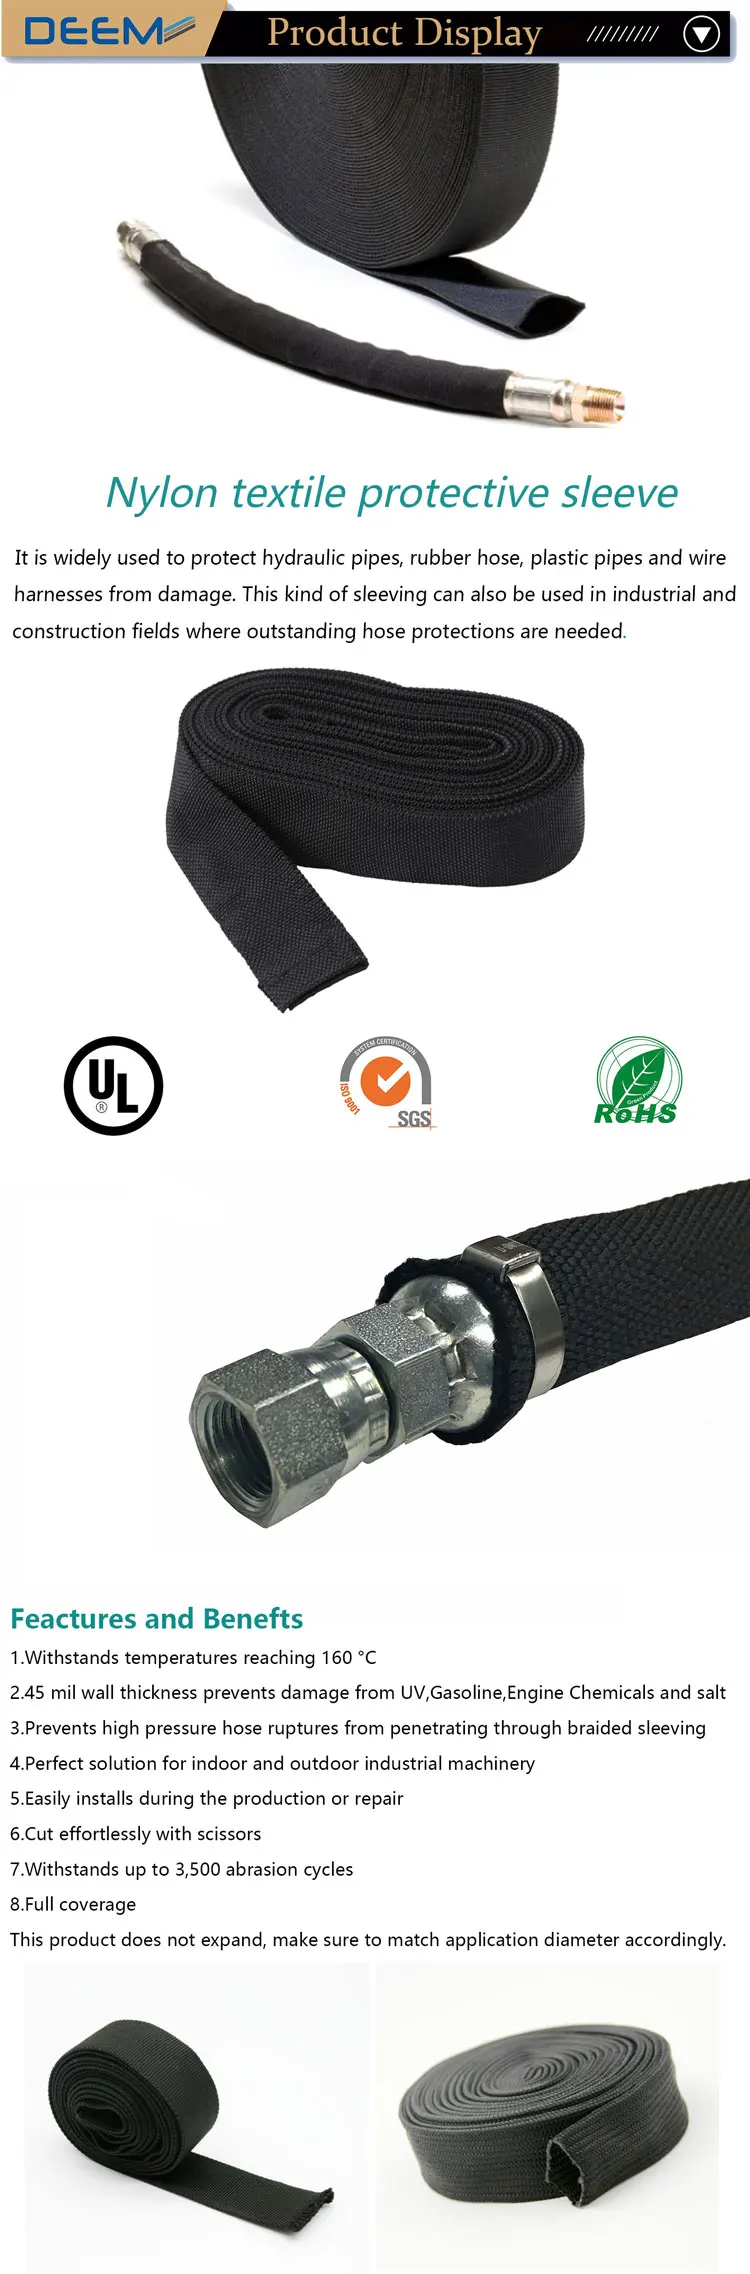 DEEM Nylon hydraulic hose protection sleeve for Prevents high pressure hose ruptures